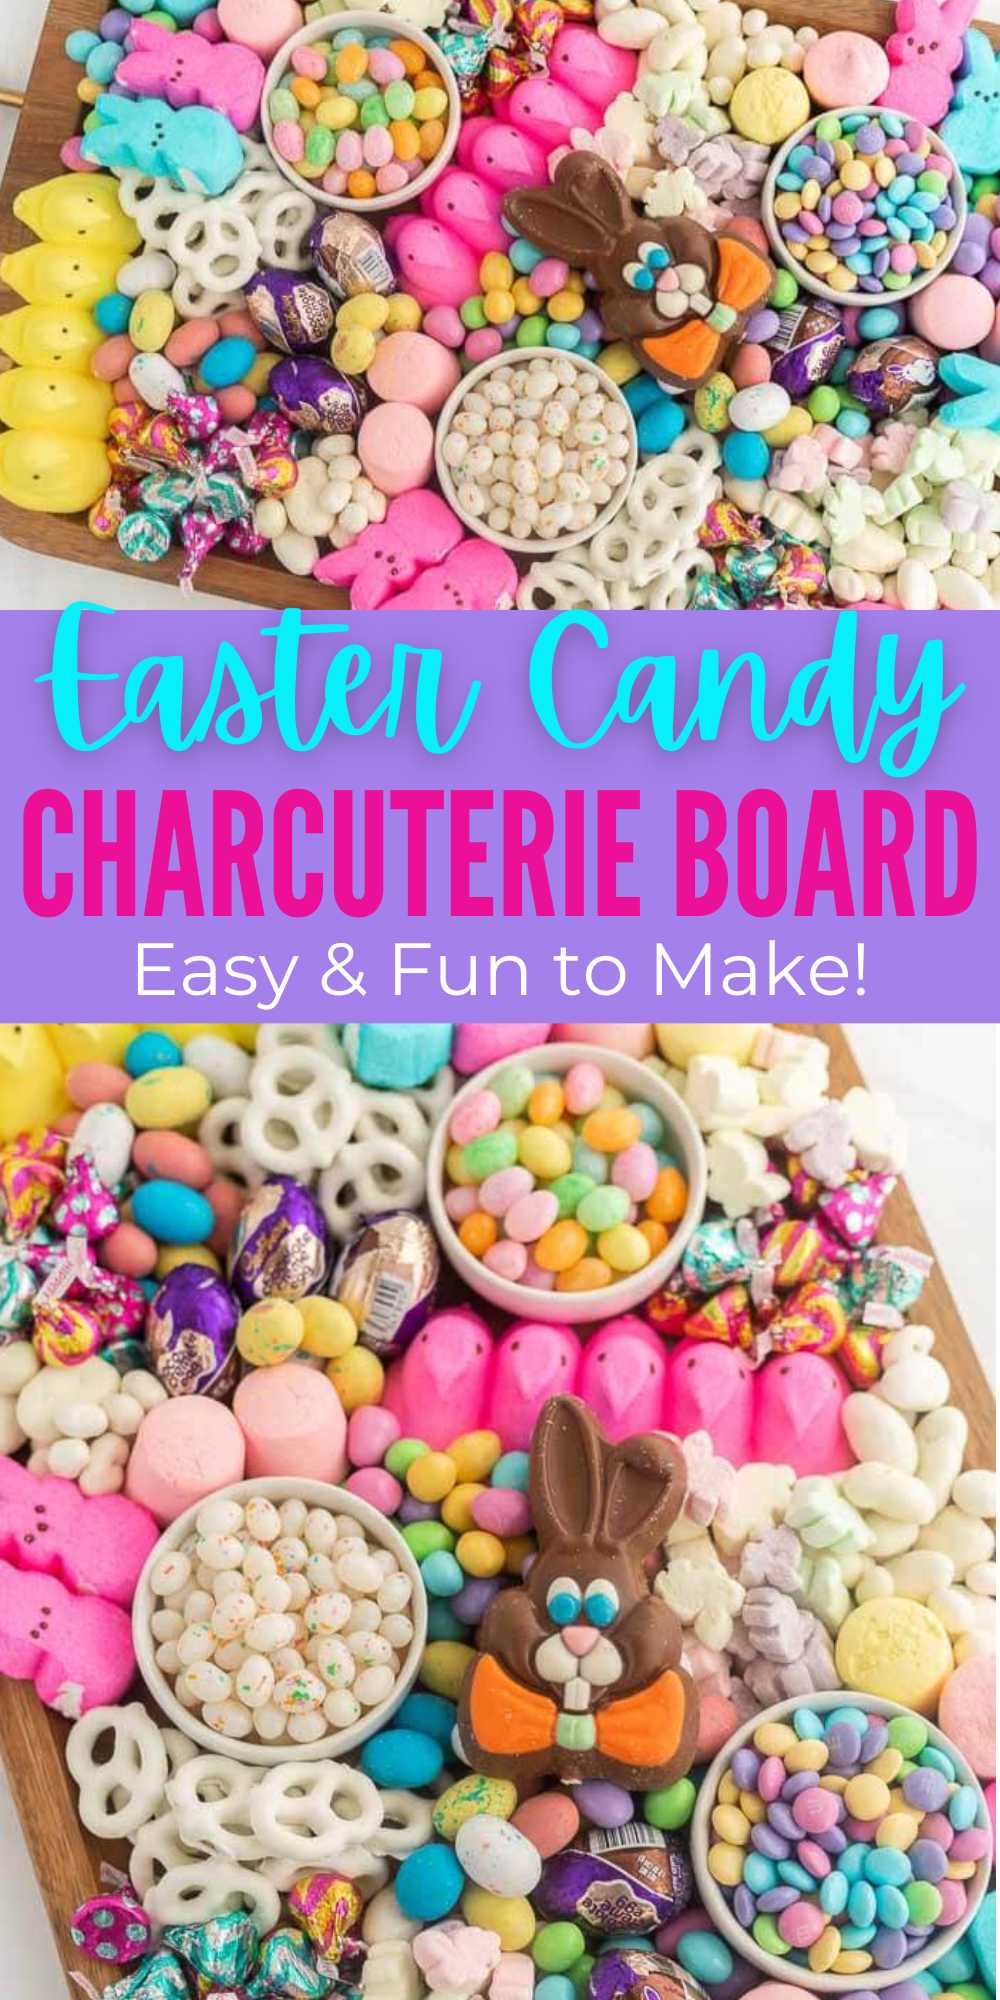 This Easter Candy Charcuterie Board is the perfect dessert to display your favorite Easter candy. Easy to make and so fun and festive. It is loaded with our favorite Easter candy. From the Peeps, Jelly Beans, and chocolate covered Easter eggs this charcuterie board displays them perfectly. #eatingonadime #eastercandycharcuterieboard #eastercandy #charcuterieboard